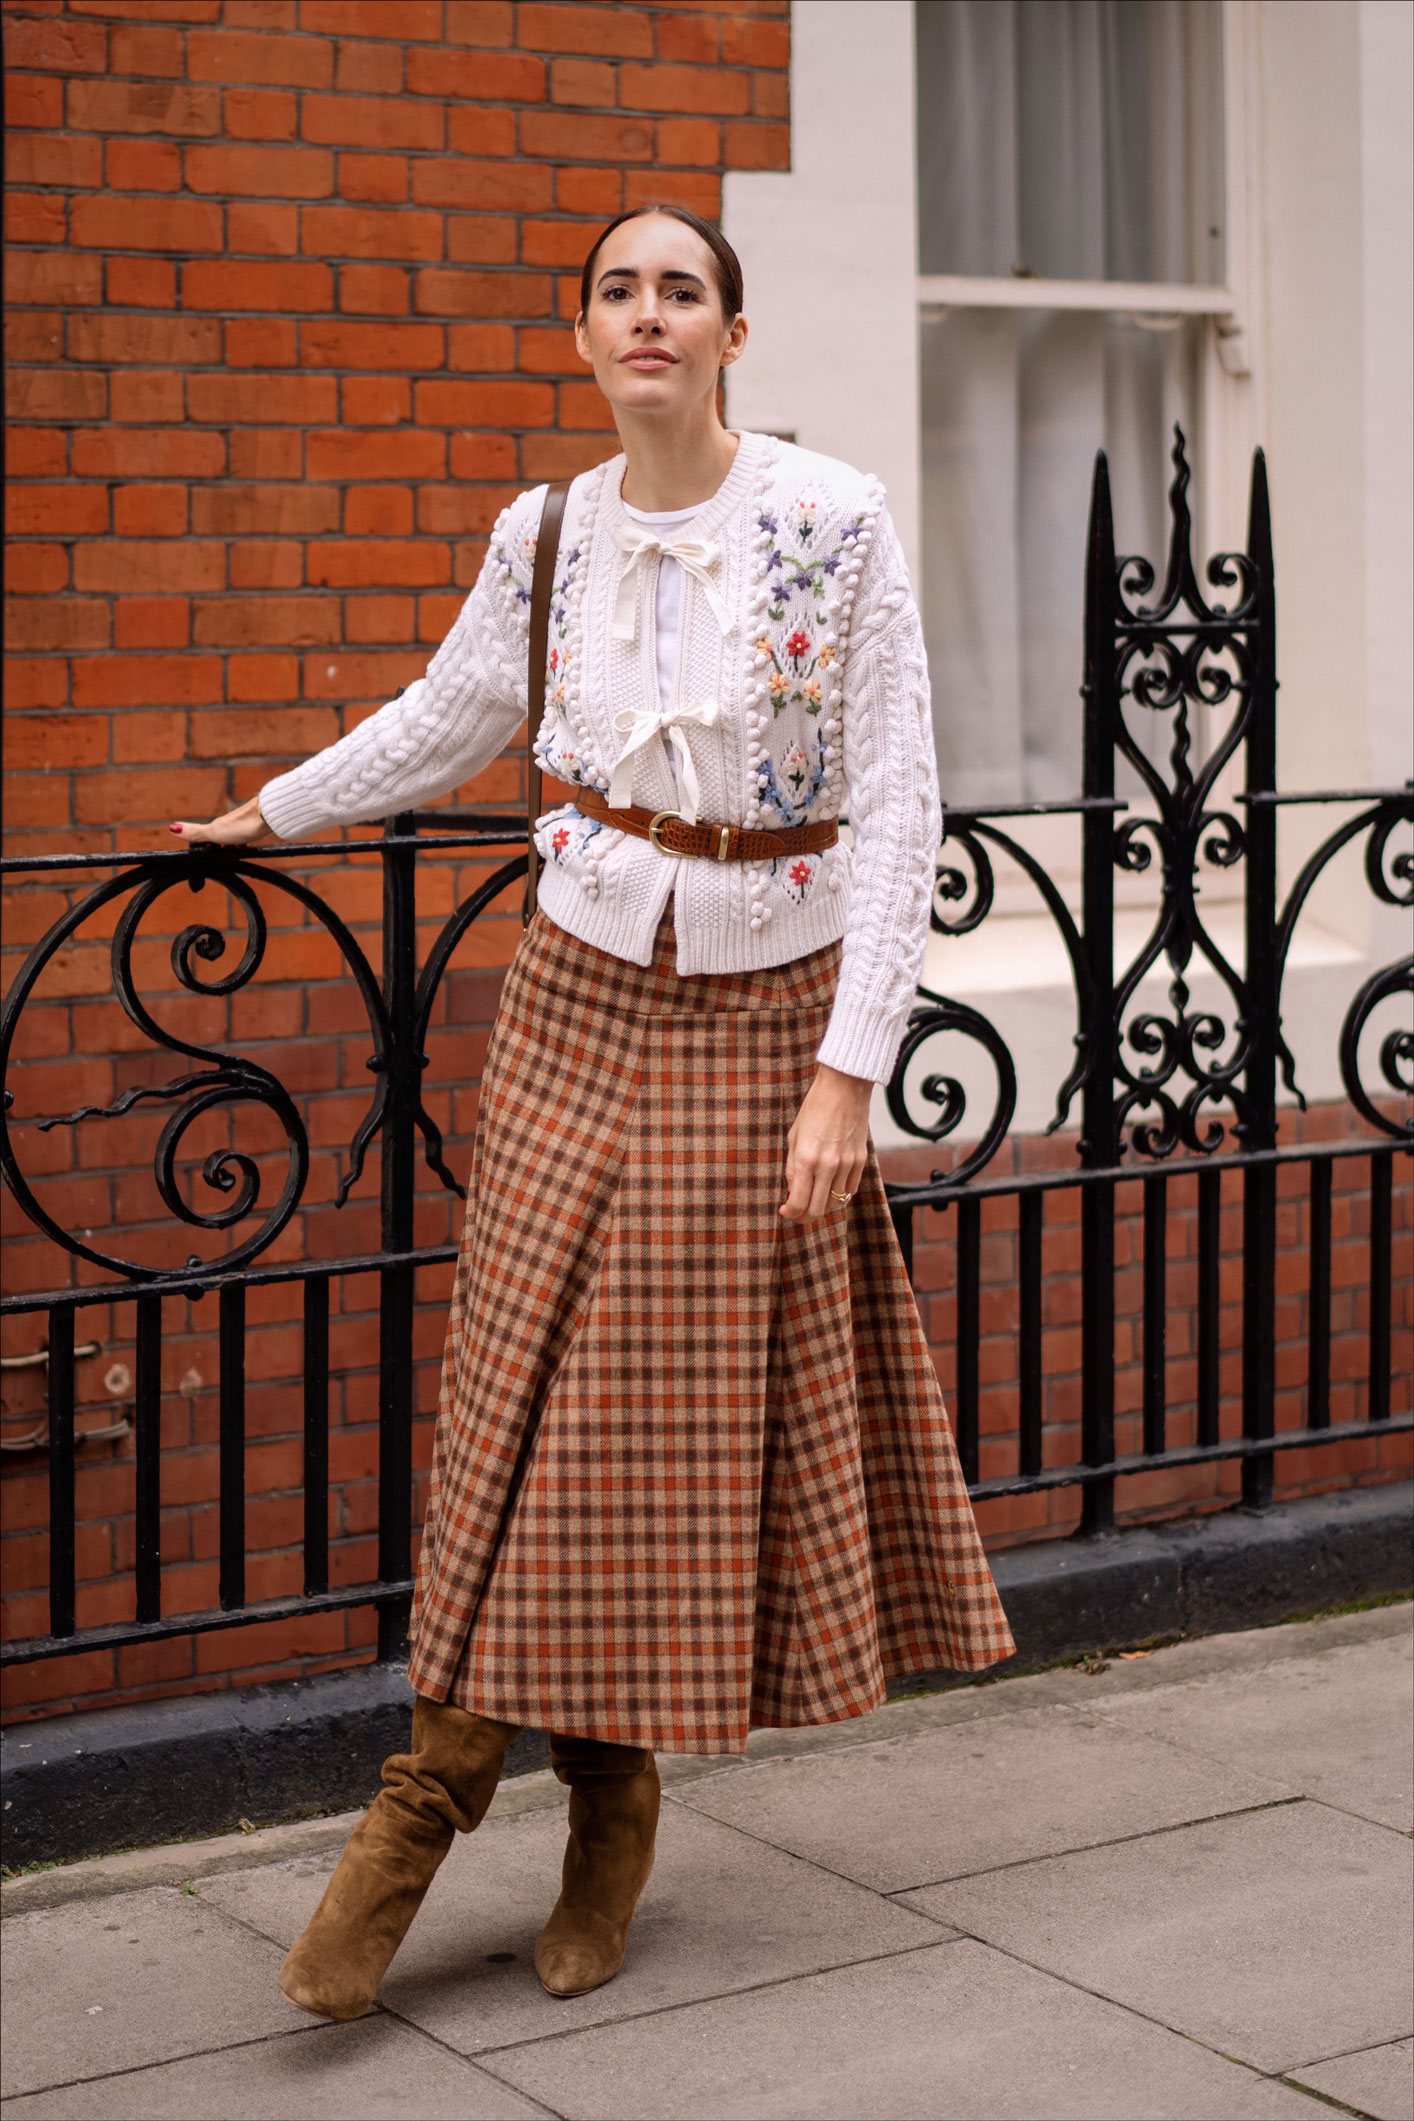 Louise wearing an embroidered cardi and a plaid midi skirt